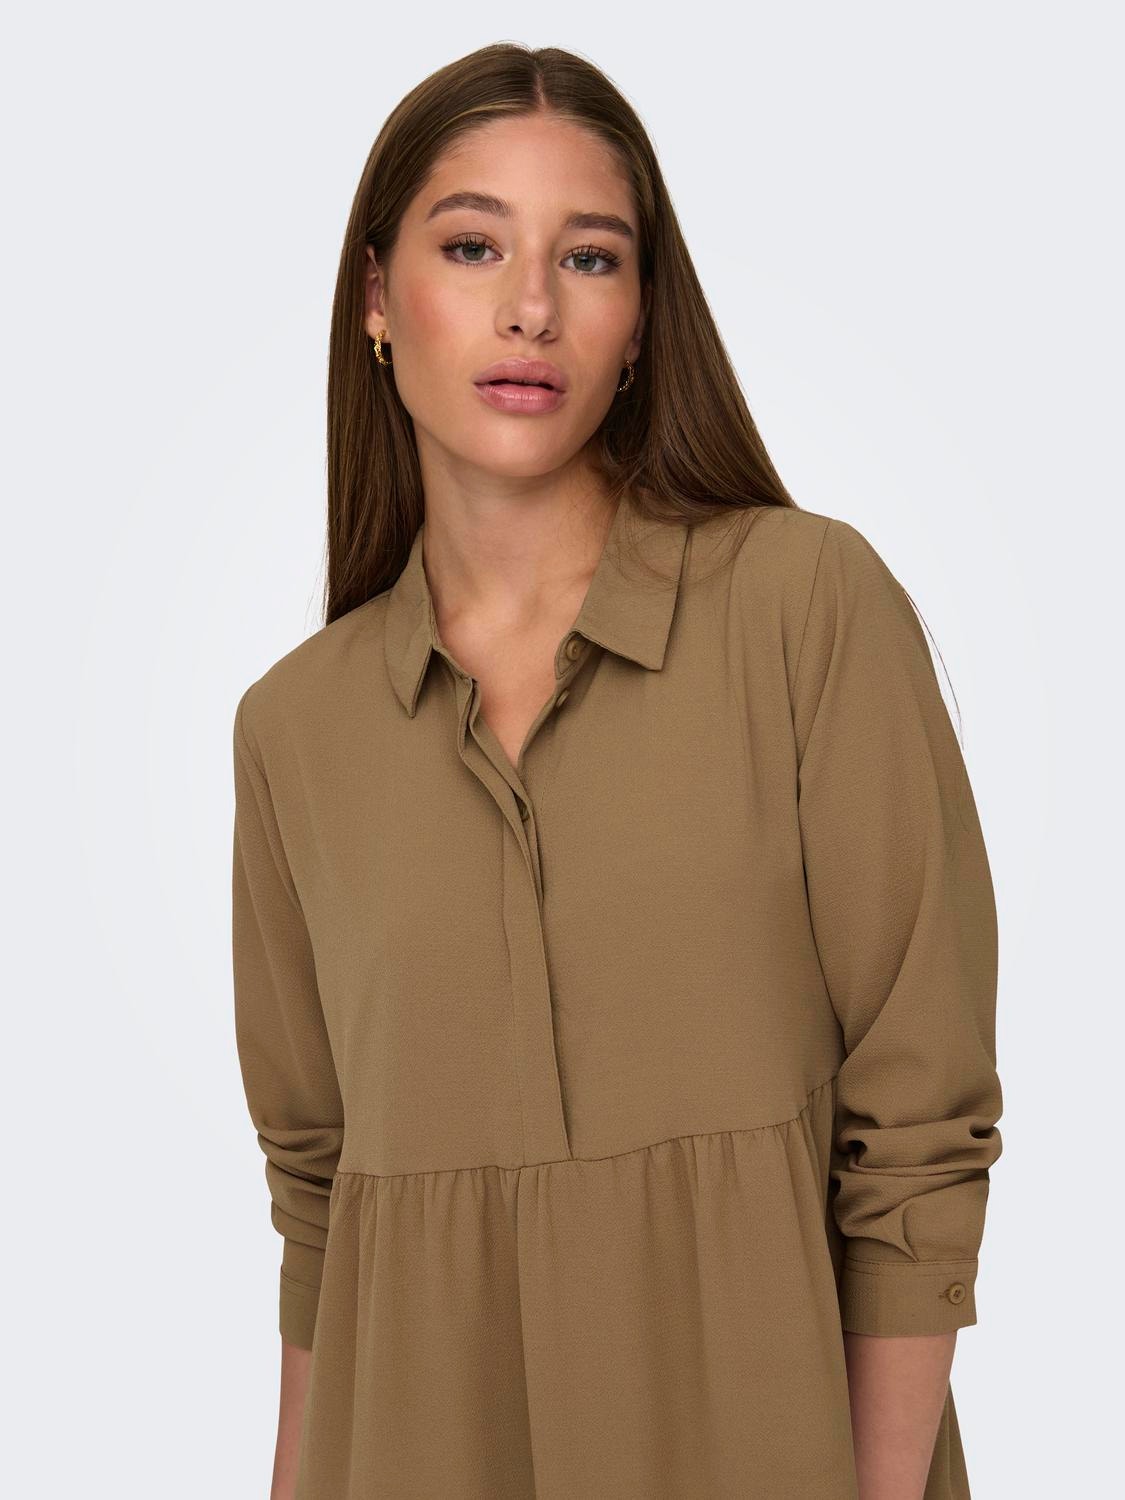 ONLY Solid colored Shirt dress -Toasted Coconut - 15212412